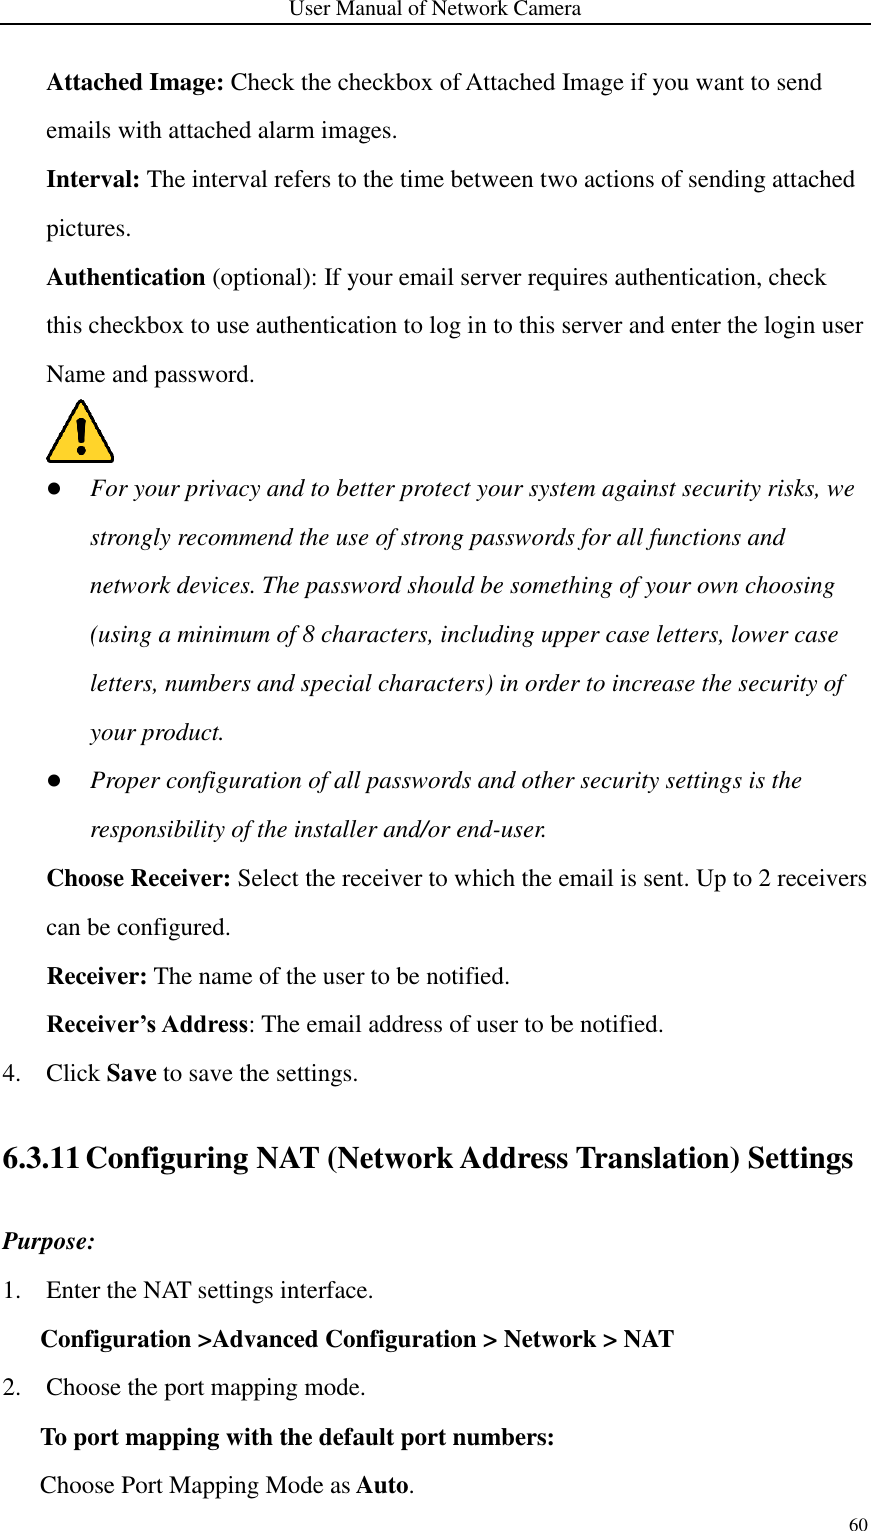 User Manual of Network Camera 60  Attached Image: Check the checkbox of Attached Image if you want to send emails with attached alarm images. Interval: The interval refers to the time between two actions of sending attached pictures. Authentication (optional): If your email server requires authentication, check this checkbox to use authentication to log in to this server and enter the login user Name and password.   For your privacy and to better protect your system against security risks, we strongly recommend the use of strong passwords for all functions and network devices. The password should be something of your own choosing (using a minimum of 8 characters, including upper case letters, lower case letters, numbers and special characters) in order to increase the security of your product.  Proper configuration of all passwords and other security settings is the responsibility of the installer and/or end-user. Choose Receiver: Select the receiver to which the email is sent. Up to 2 receivers can be configured. Receiver: The name of the user to be notified. Receiver’s Address: The email address of user to be notified. 4. Click Save to save the settings. 6.3.11 Configuring NAT (Network Address Translation) Settings Purpose: 1. Enter the NAT settings interface. Configuration &gt;Advanced Configuration &gt; Network &gt; NAT 2. Choose the port mapping mode. To port mapping with the default port numbers: Choose Port Mapping Mode as Auto. 